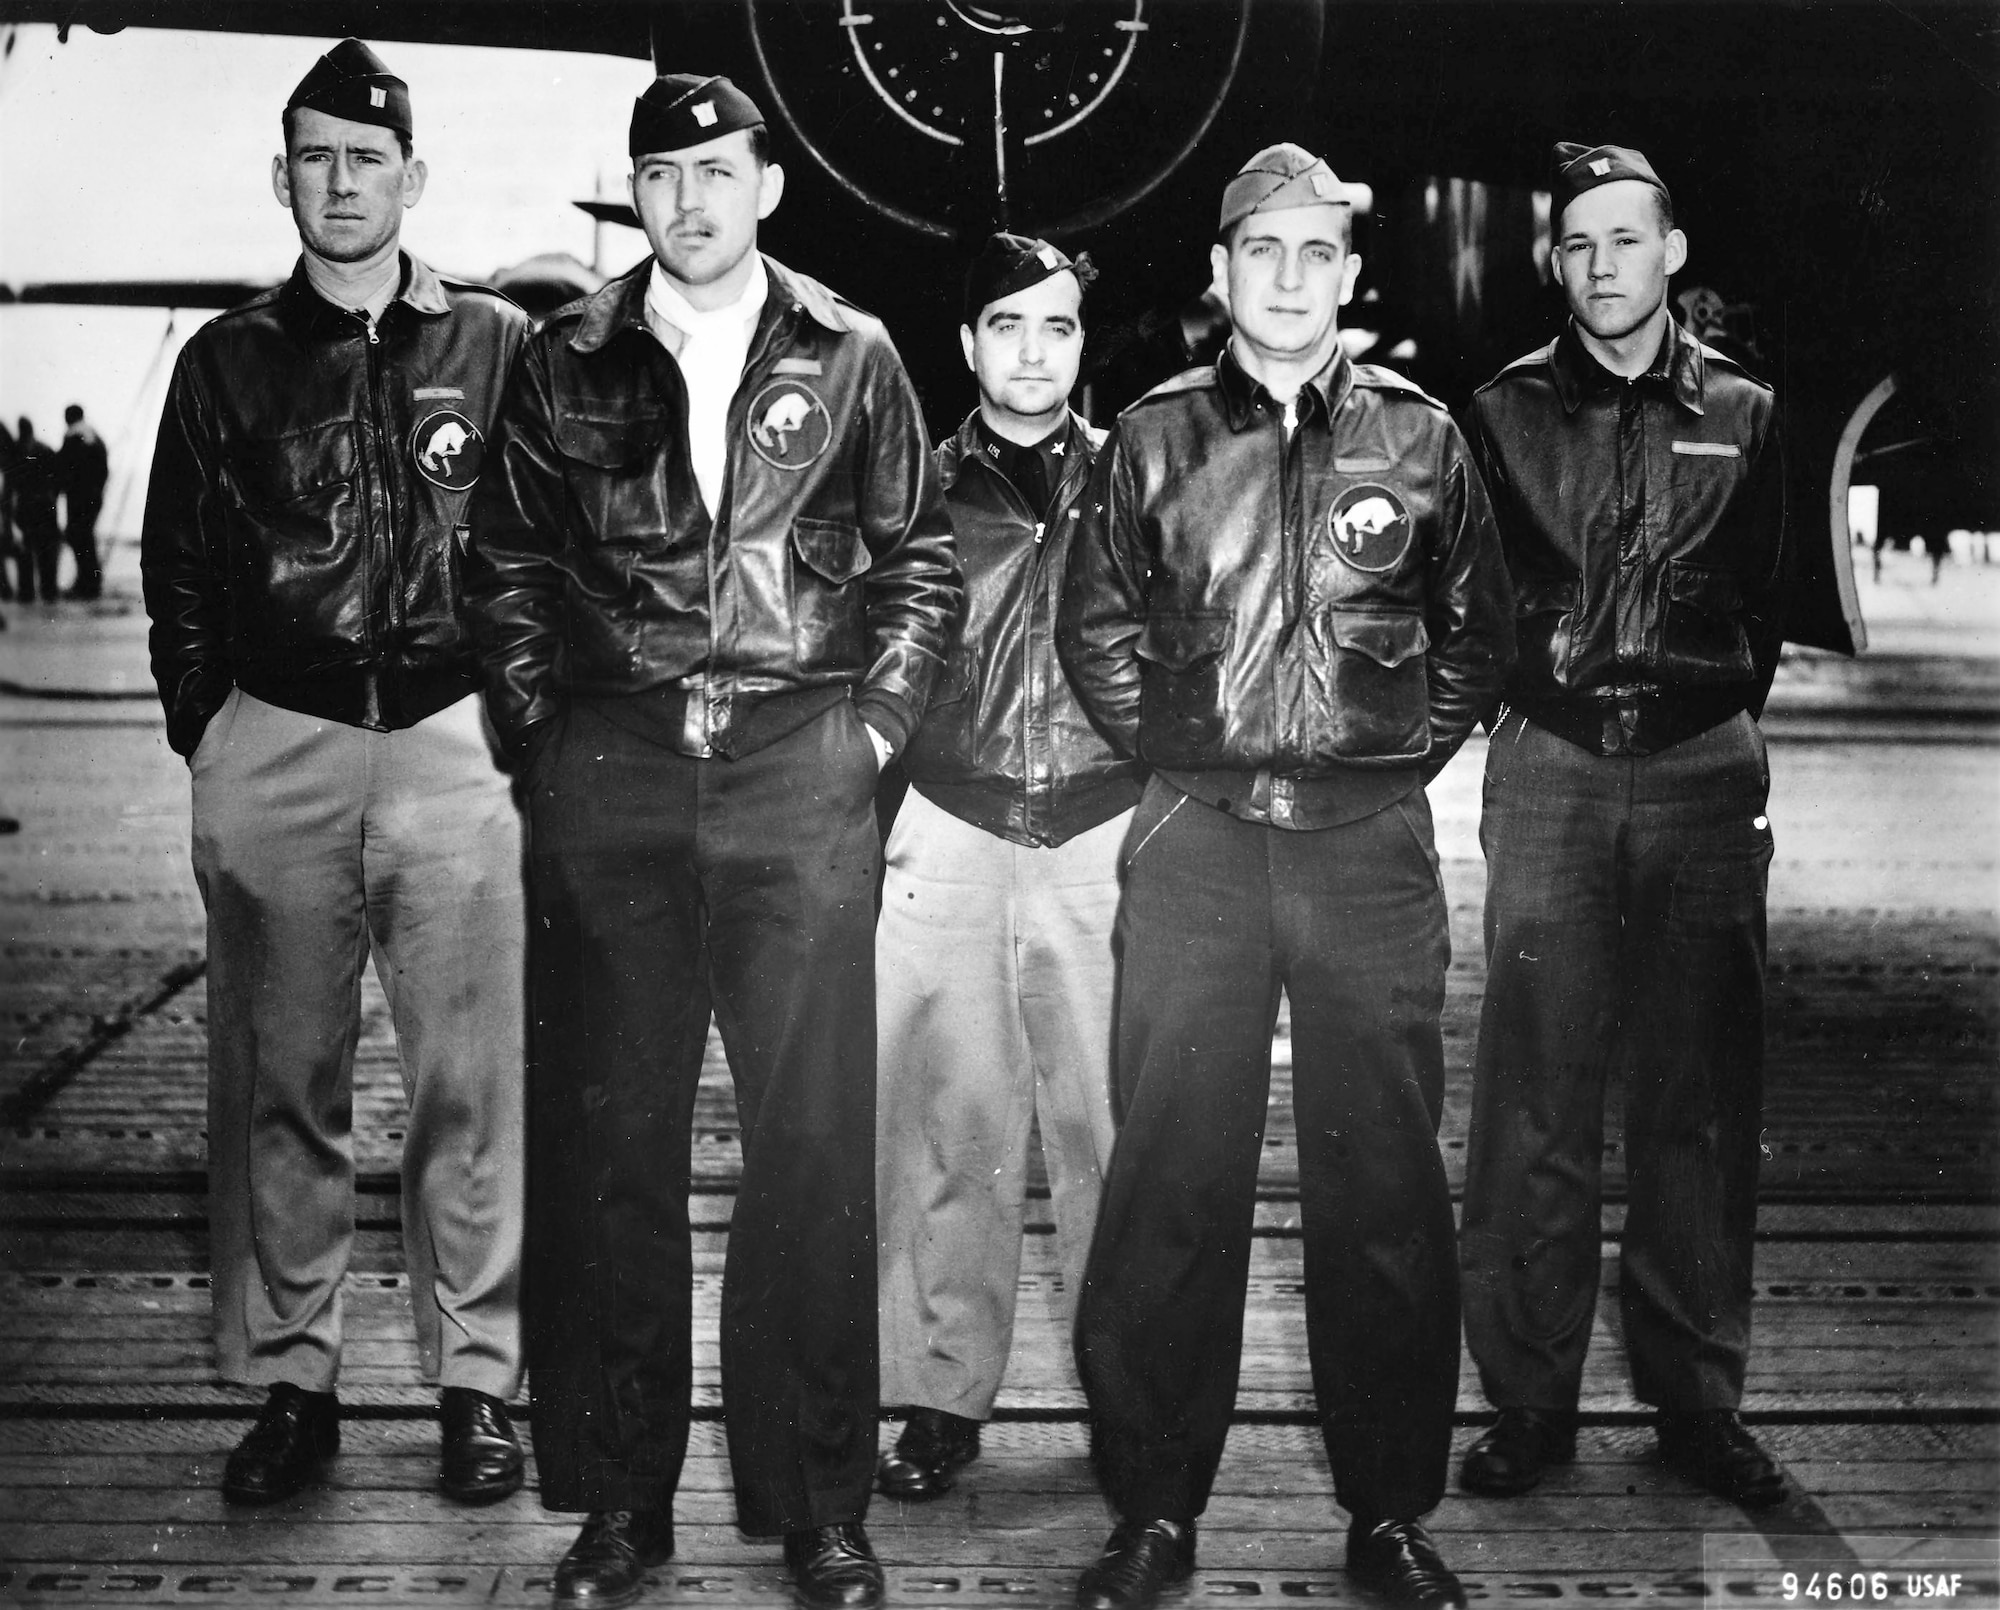 Crew 7, the Lawson Crew, in a crew picture taken aboard USS Hornet (CV-8) enroute to Japan in April, 1942.  Left to right are Lt. Charles L. McClure, Navigator; Lt. Ted W. Lawson, Pilot; Lt Robert S. Clever, Bombardier; Lt. Dean Davenport, Co-pilot and Sgt. David J. Thatcher, Flight Engineer/Gunner.  (Children of the Doolittle Raiders.com)